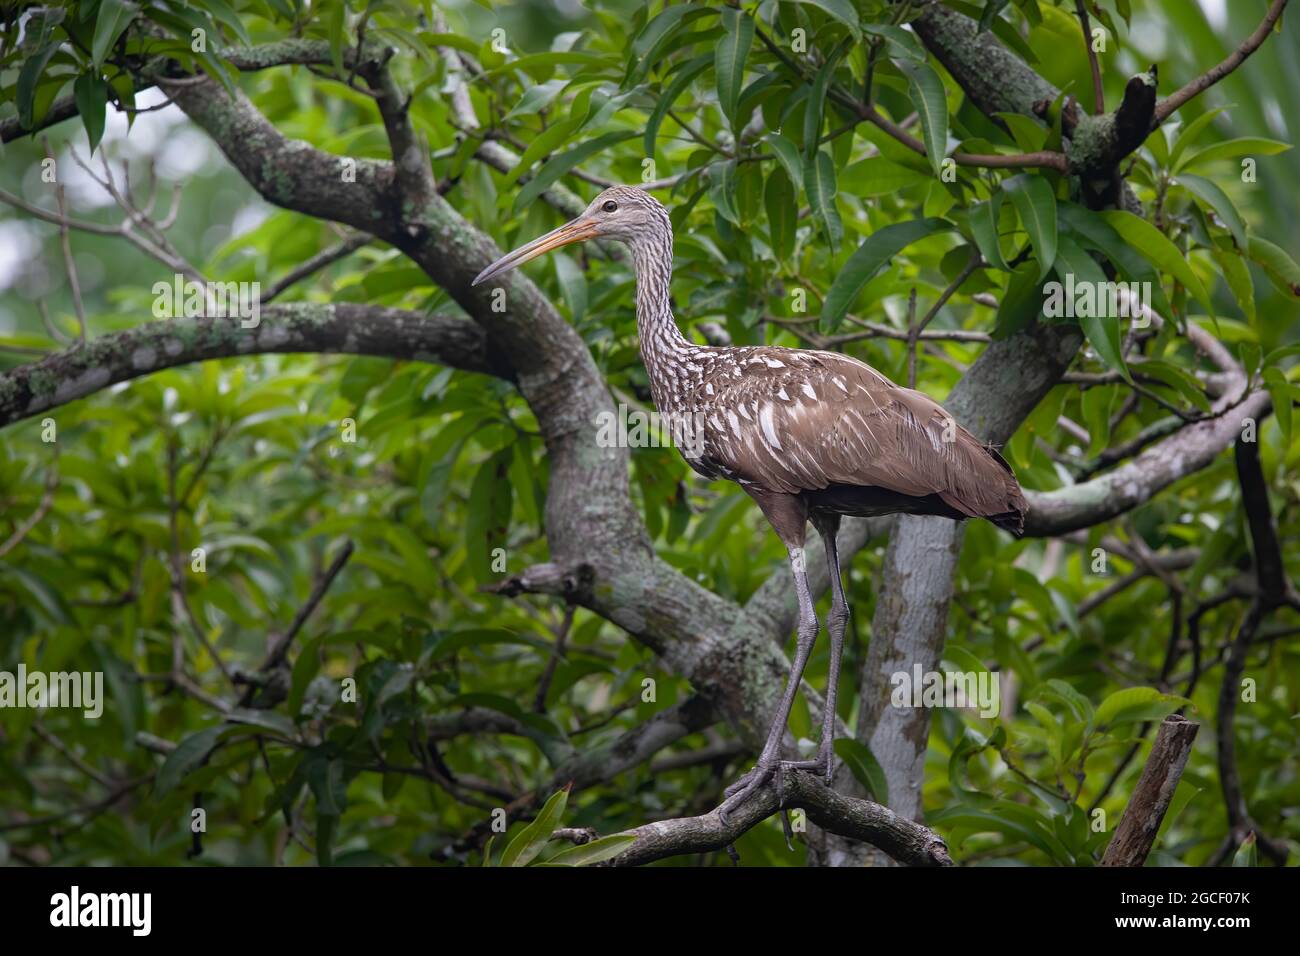 A cute looking Limpkin stands on a tree branch in a wooded area of North Florida in the early morning hours. Stock Photo